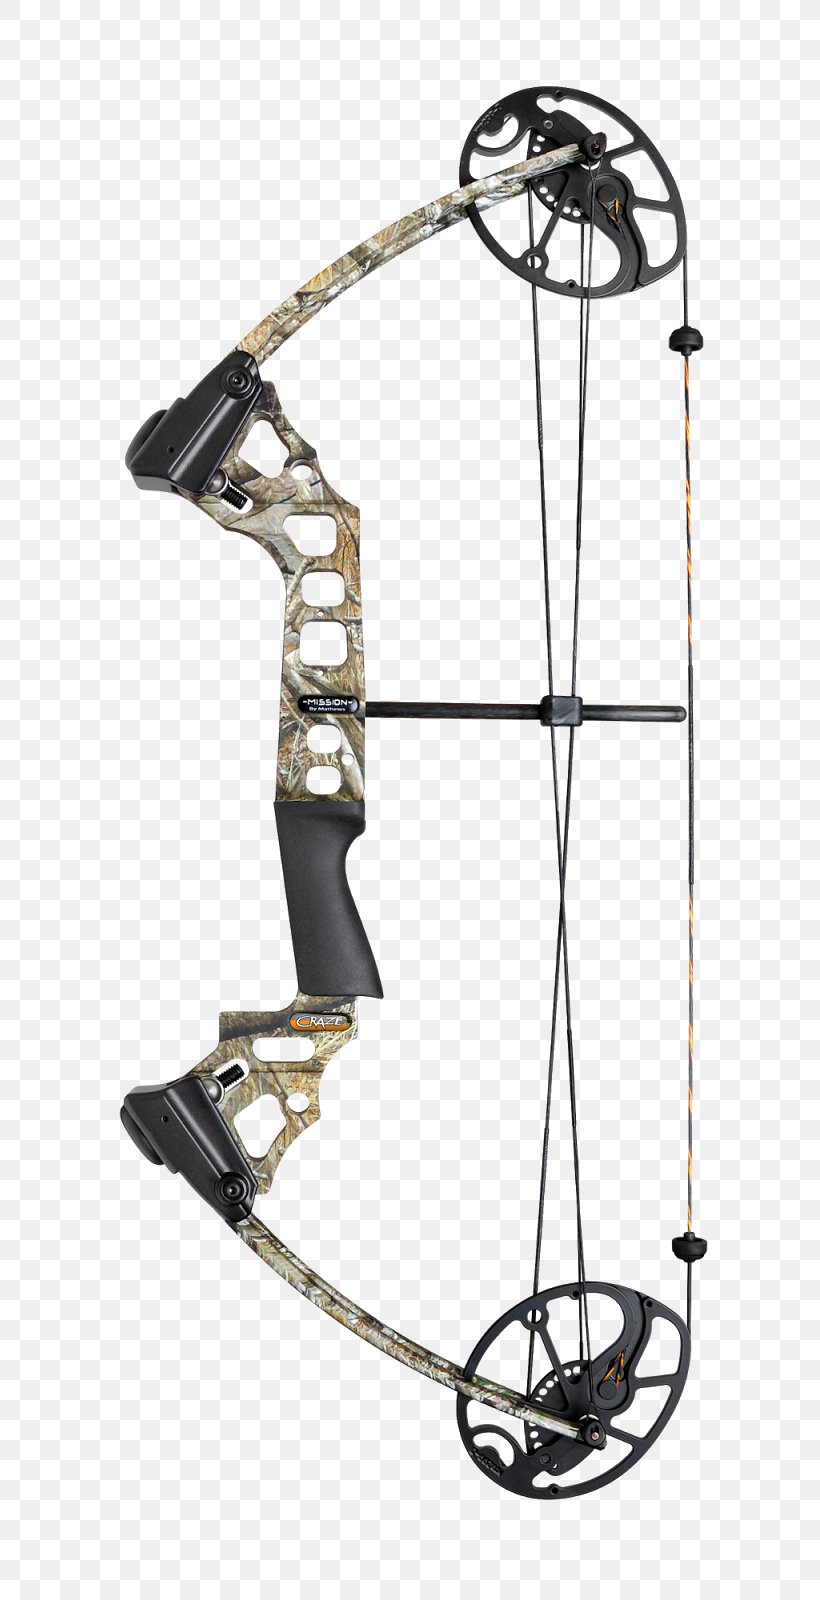 Compound Bows Bowhunting Bow And Arrow Archery, PNG, 669x1600px, Compound Bows, Archery, Borkholder Archery, Bow, Bow And Arrow Download Free